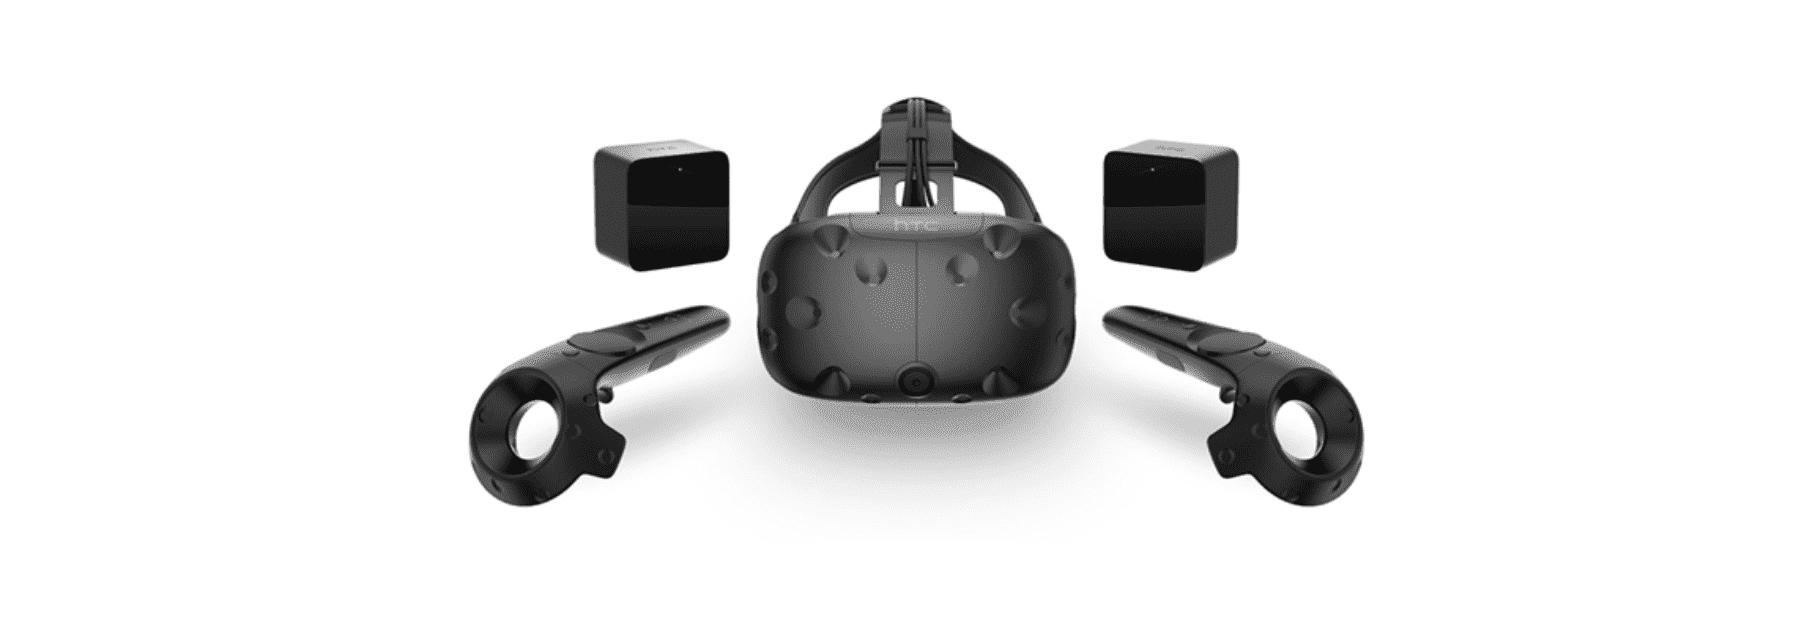 Review on HTC VIVE